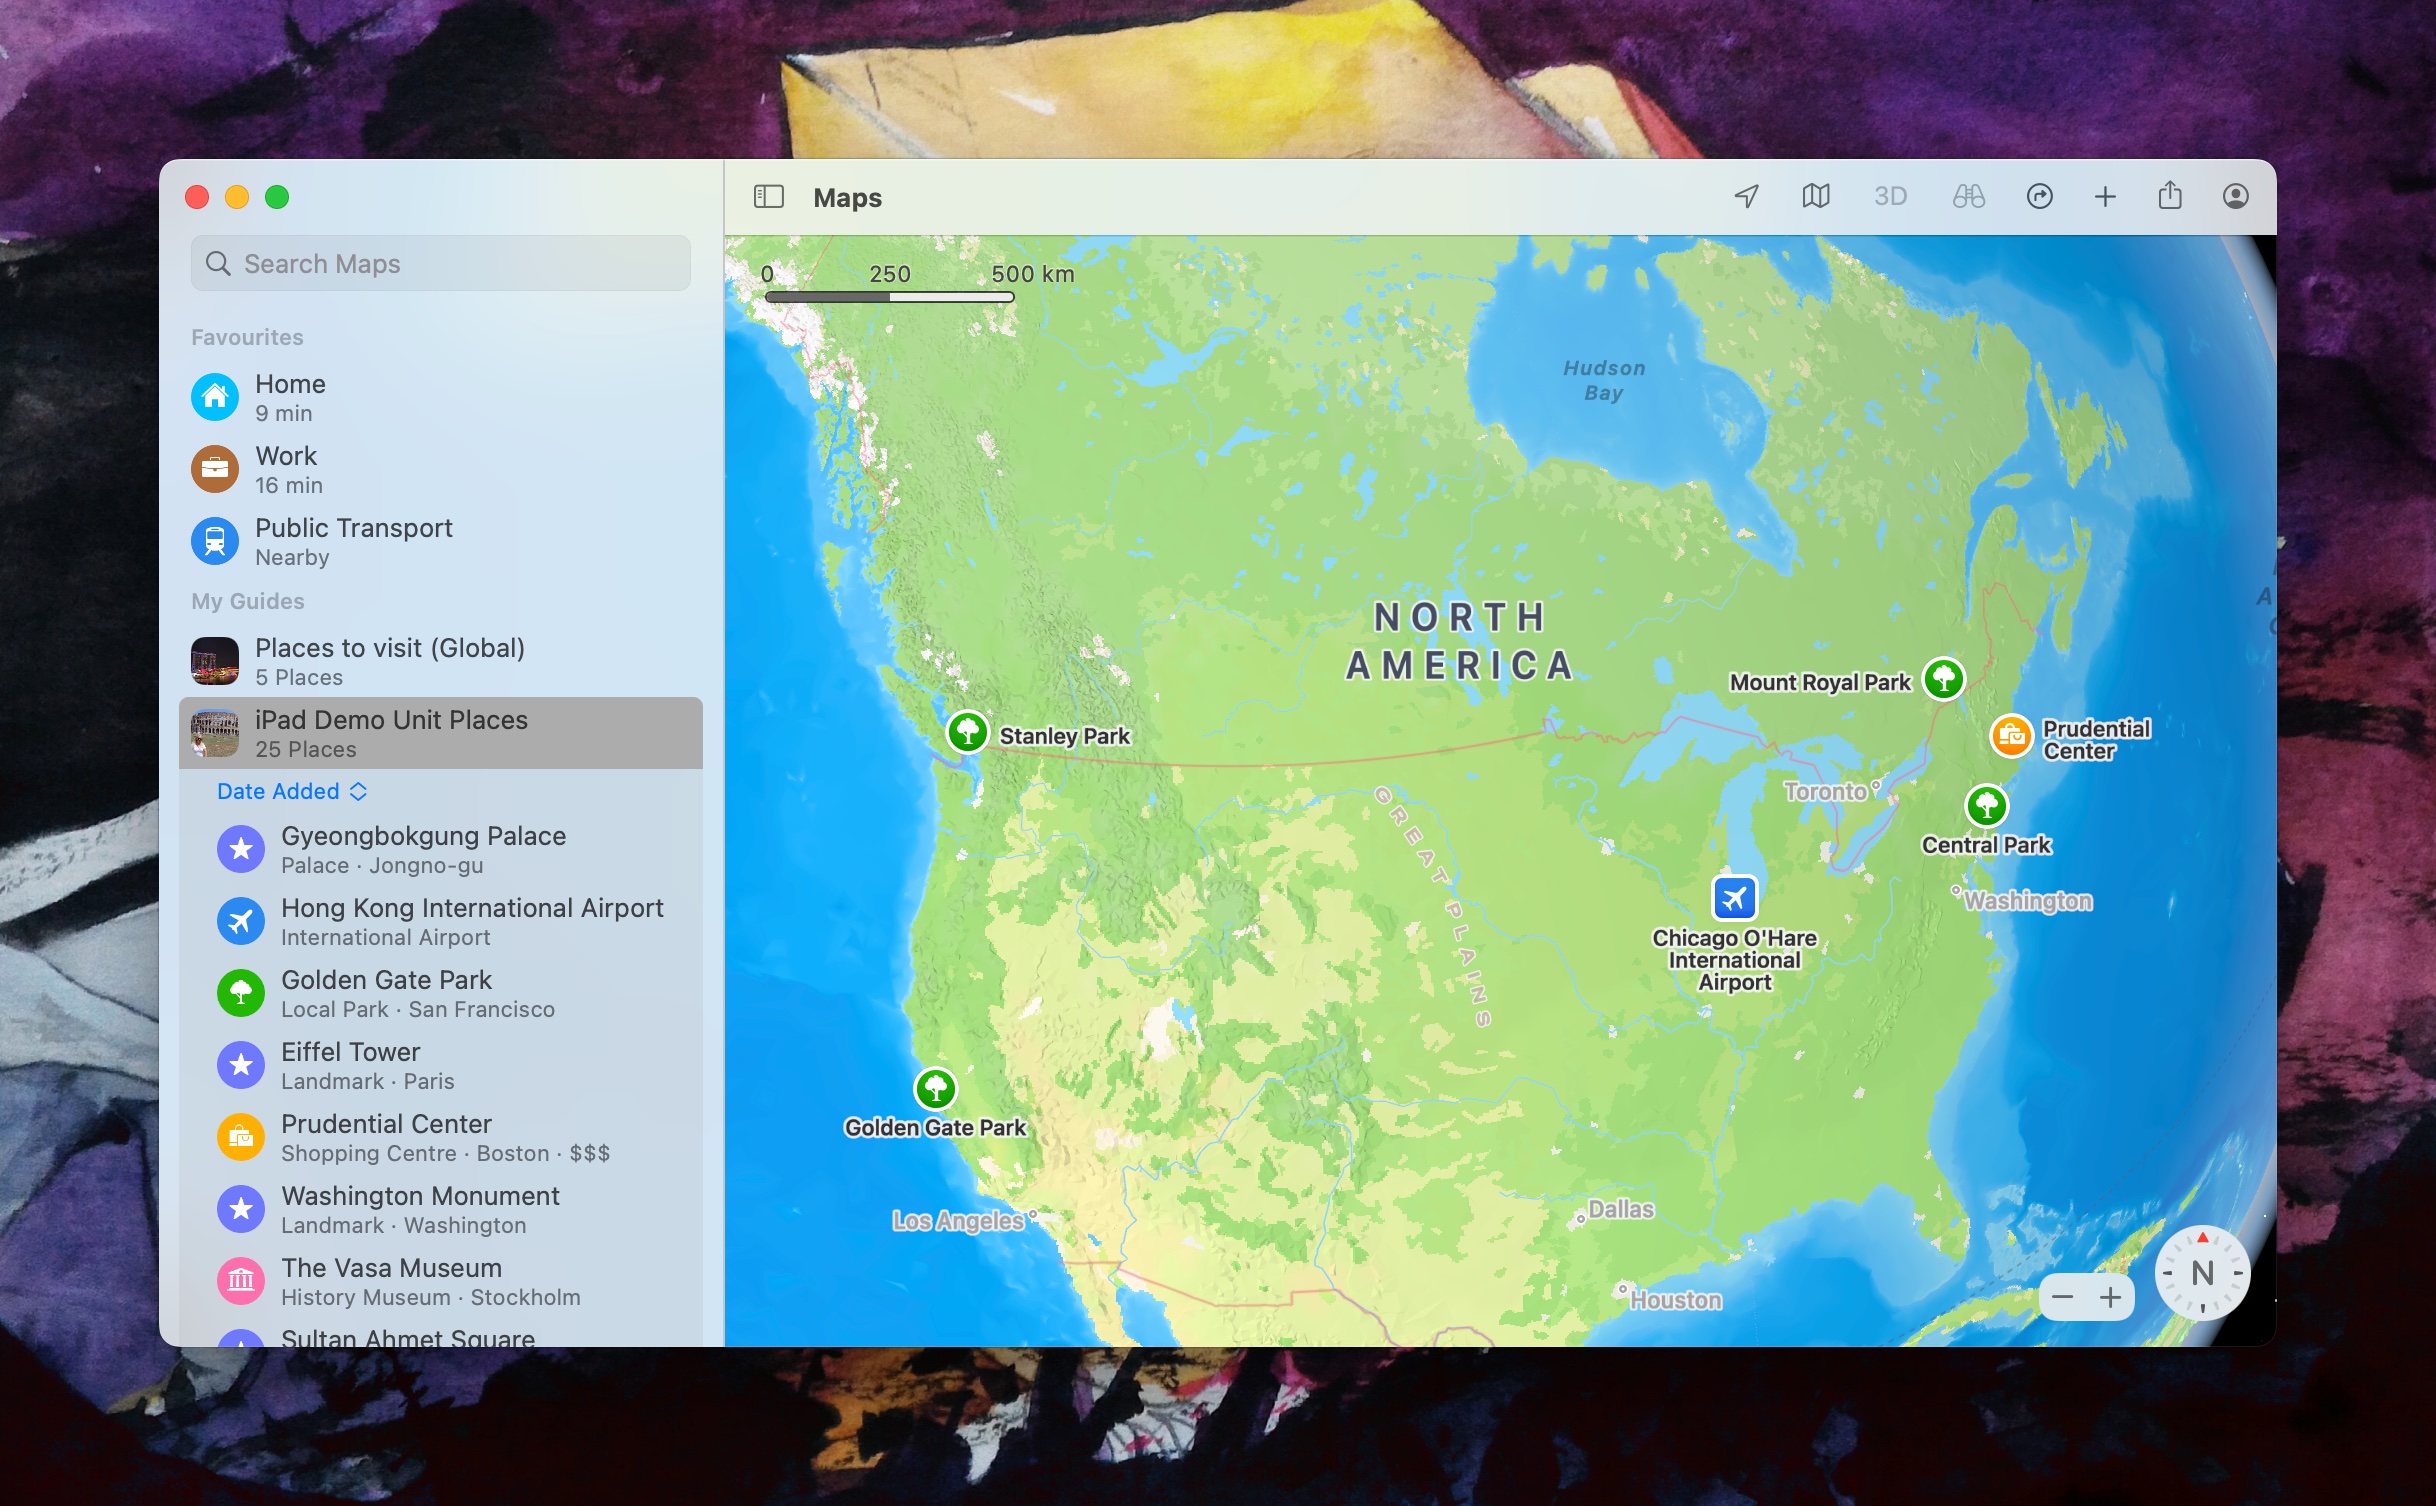 A screenshot of the macOS Maps app. A map collection titled "iPad Demo Unit Places" is selected on the right. Visible in the main window is North America which depicts a number of bookmarked locations.